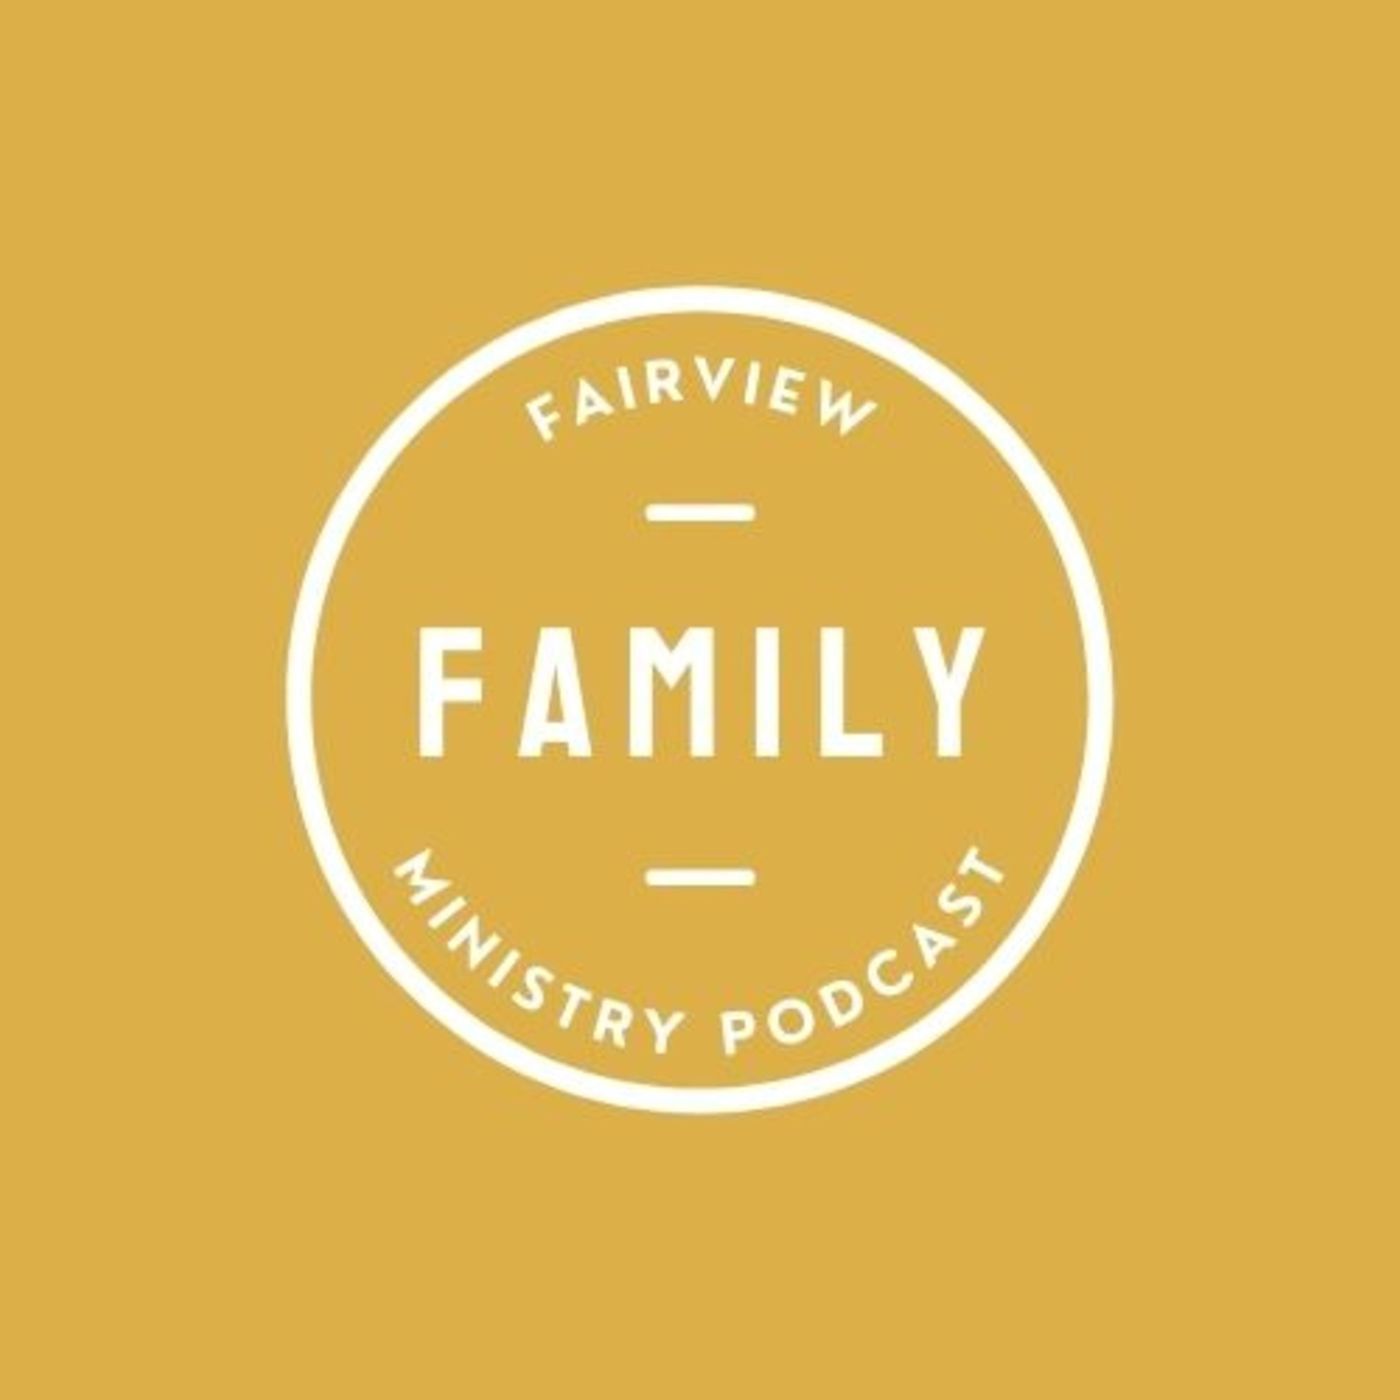 Fairview Family Ministry Podcast 12: Child Discipleship, Awana, And the New Map for Kid's Ministry